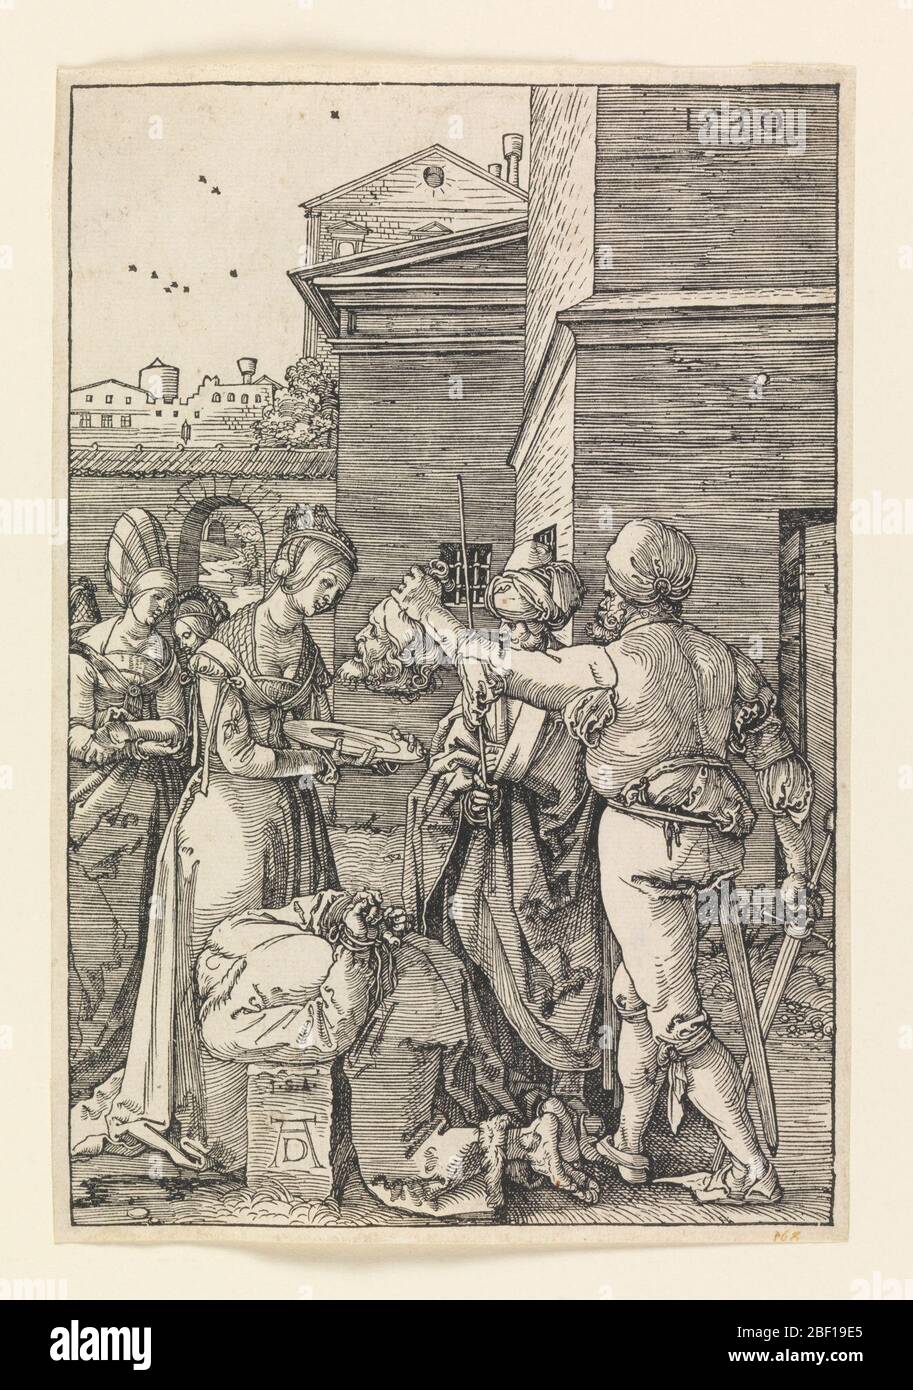 Beheading of John the Baptist. the executioner stands at right holding the head of St. John, which Salome, left, waits to receive on a plate. The body of St. John, kneeling, faces left. Monogram of Durer, lower left. Date, 1510, upper right. Stock Photo